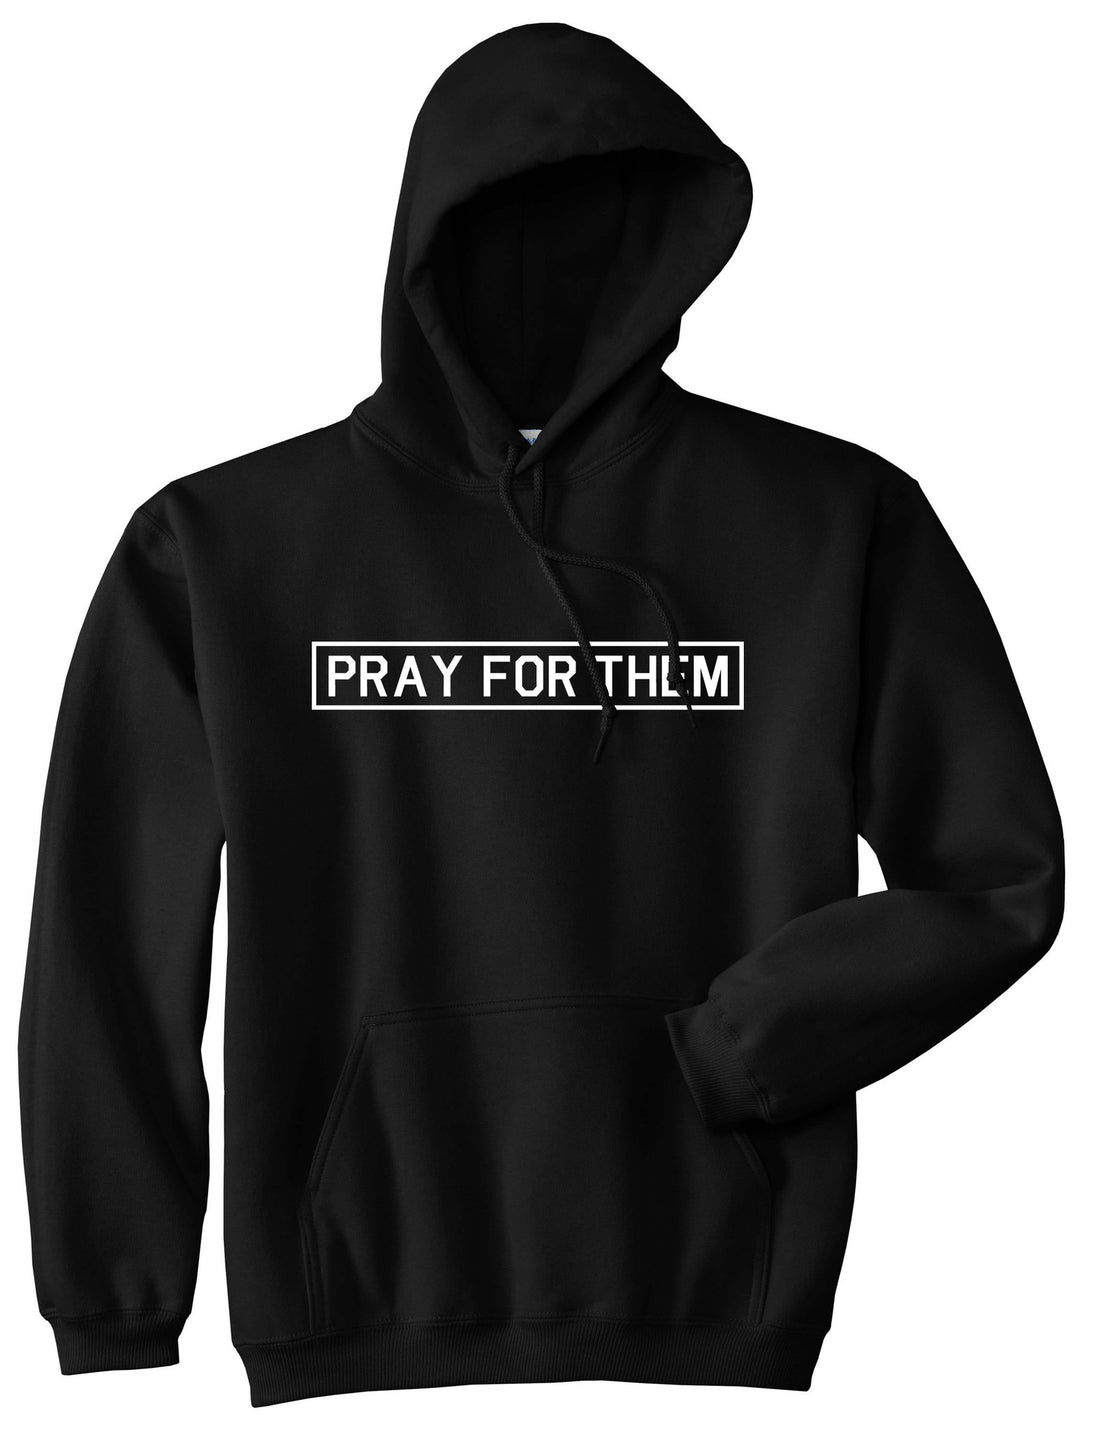 Pray For Them Fall15 Pullover Hoodie Hoody in Black by Kings Of NY